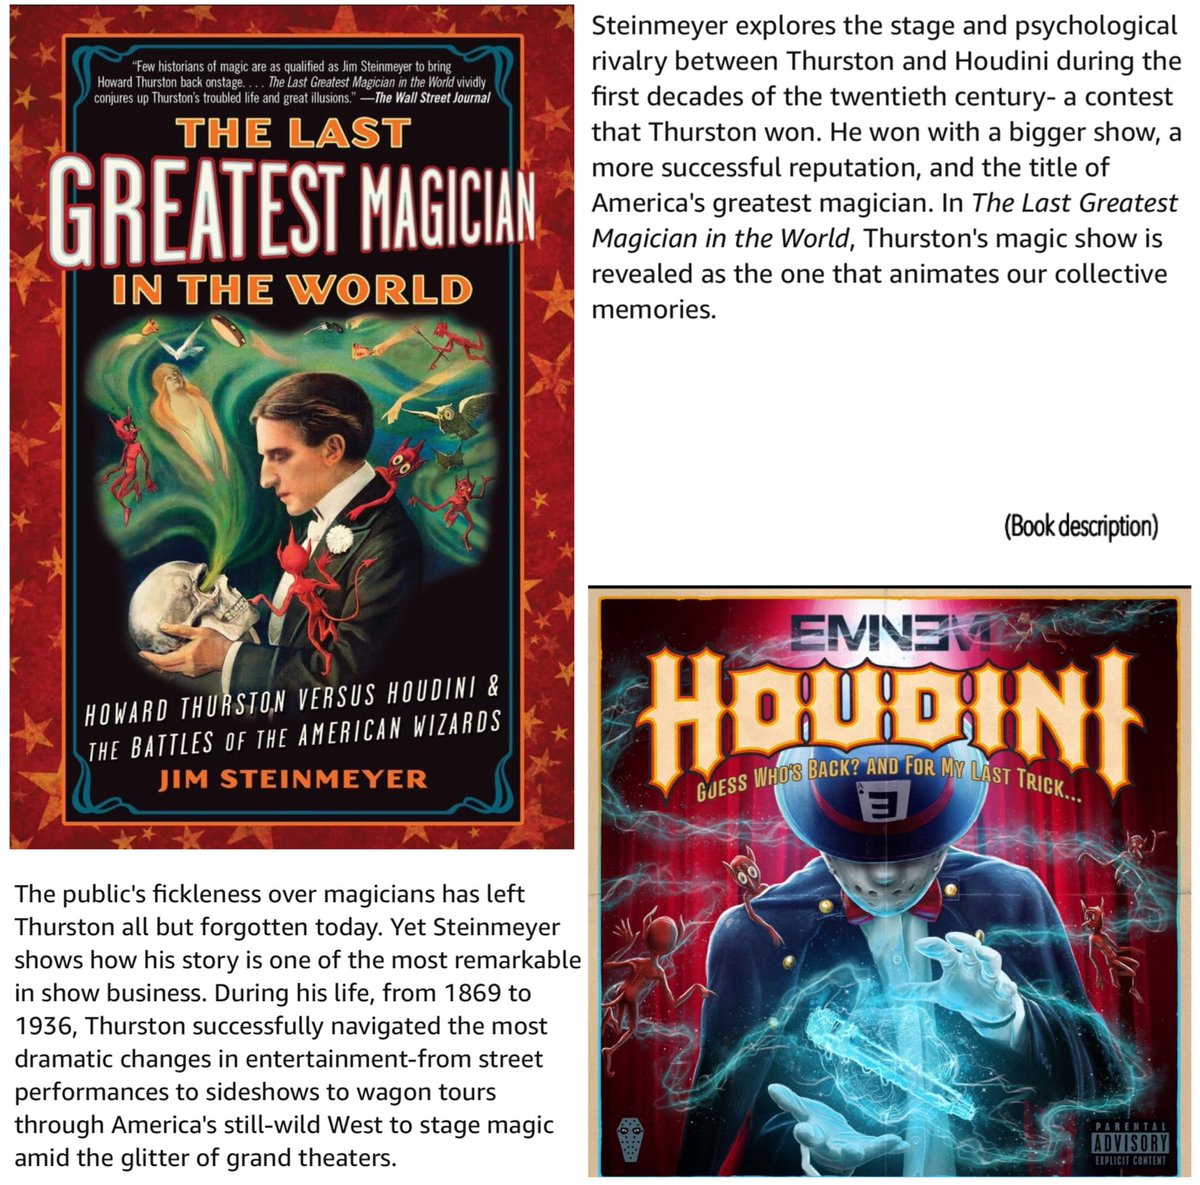 ✨ #Eminem always has great inspiration

In this book, Jim Steinmeyer (stage magic historian), explores the stage & psychological rivalry between Thurston & #Houdini  ——a contest Thurston won! 

𝘛𝘩𝘢𝘵’𝘥 𝘮𝘢𝘬𝘦 𝘚𝘩𝘢𝘥𝘺=𝘏𝘰𝘶𝘥𝘪𝘯𝘪 & 𝘌𝘮=𝘛𝘩𝘶𝘳𝘴𝘵𝘰𝘯